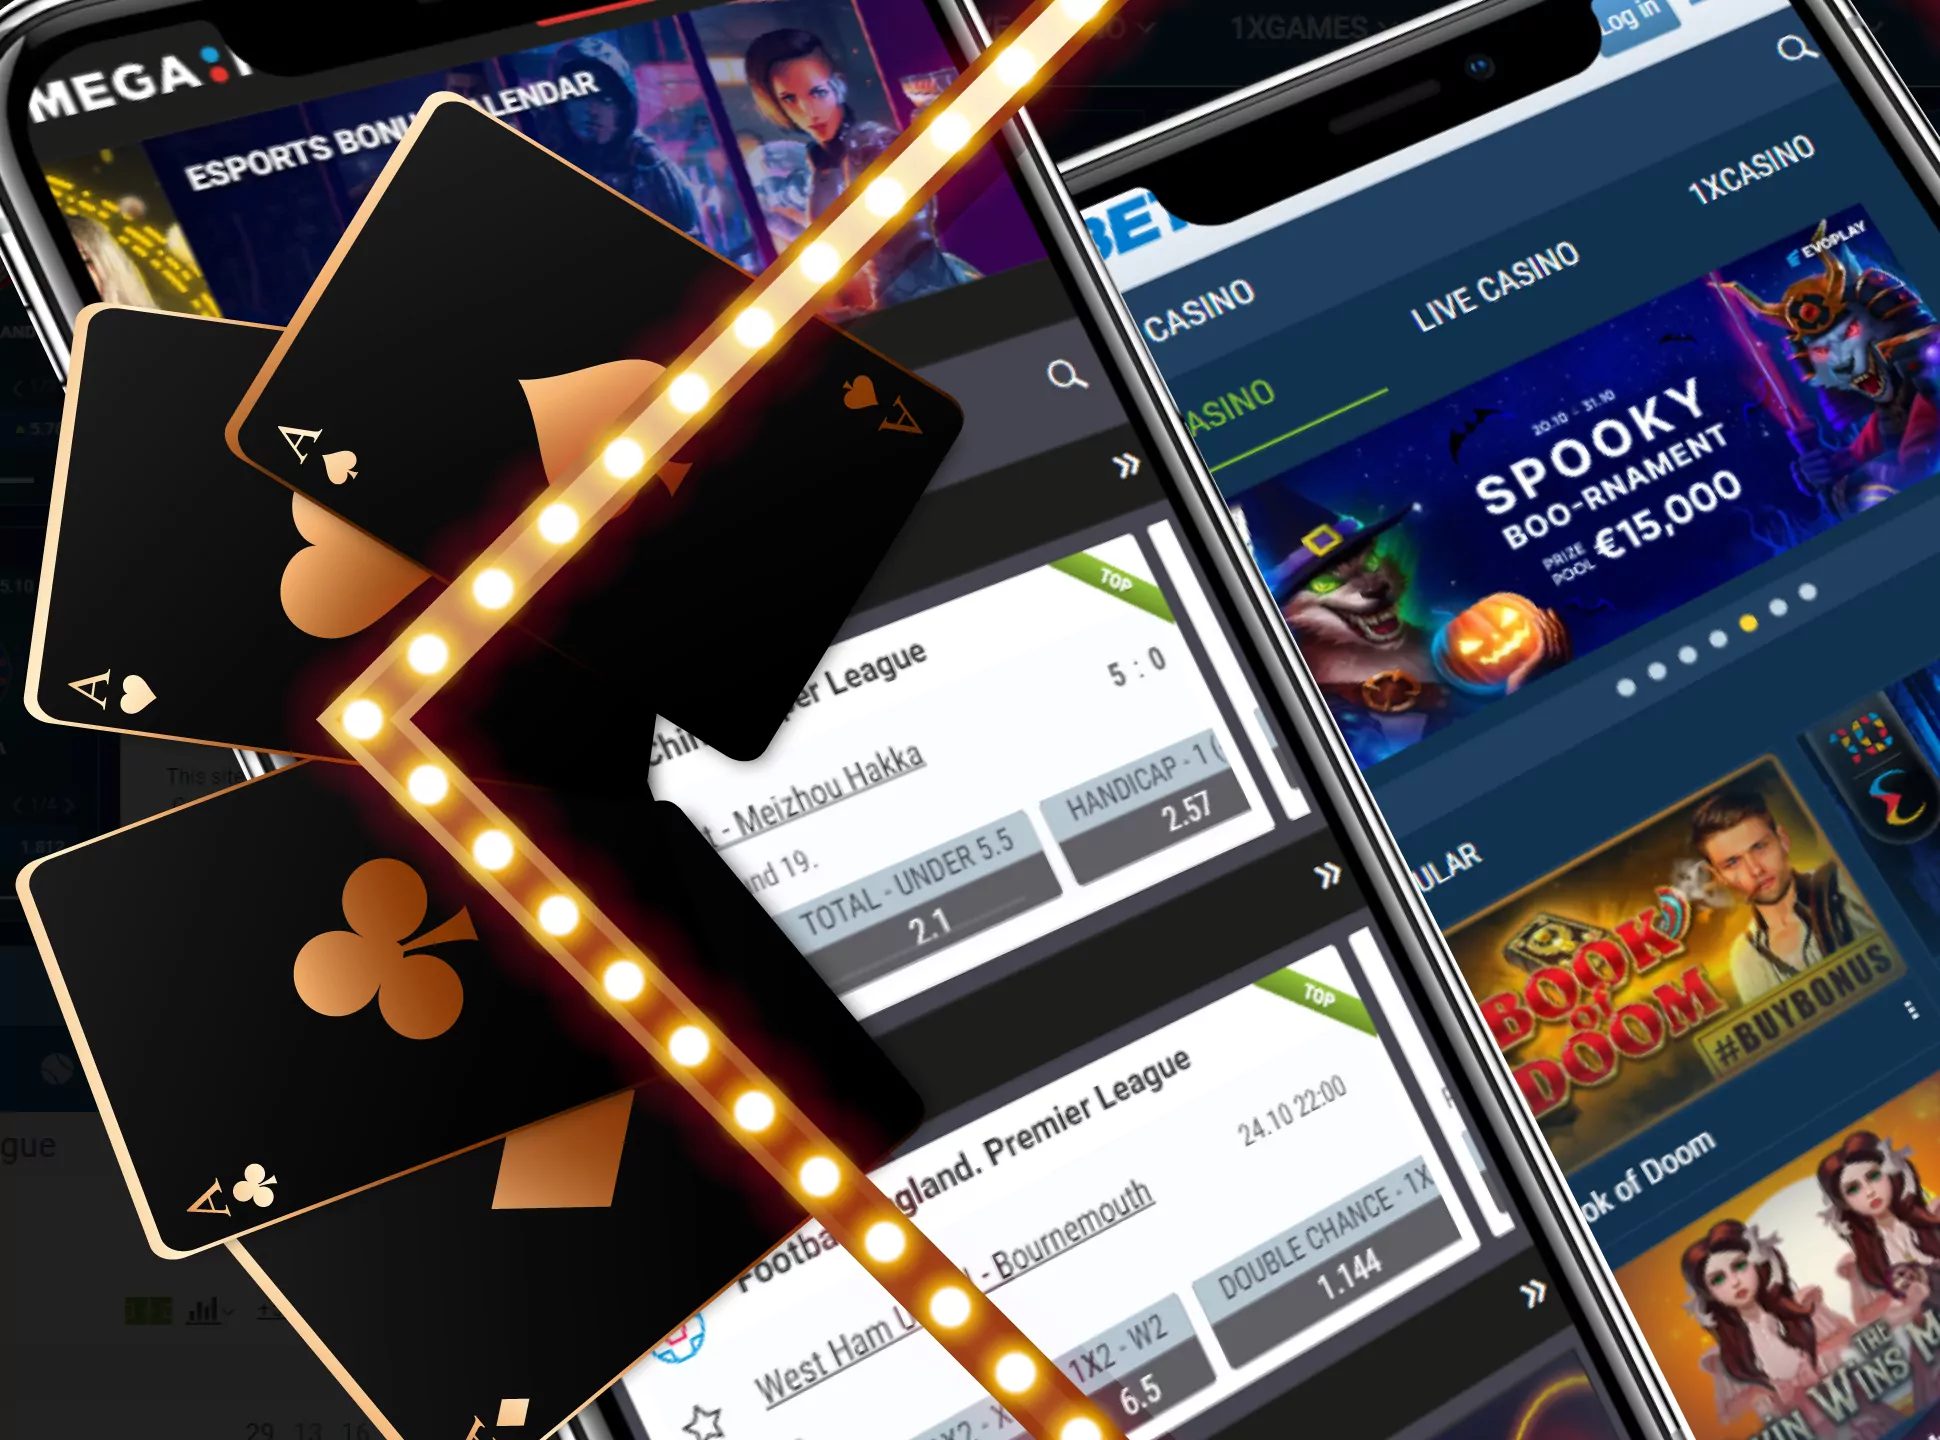 Download the casino app to play casino games at any time.